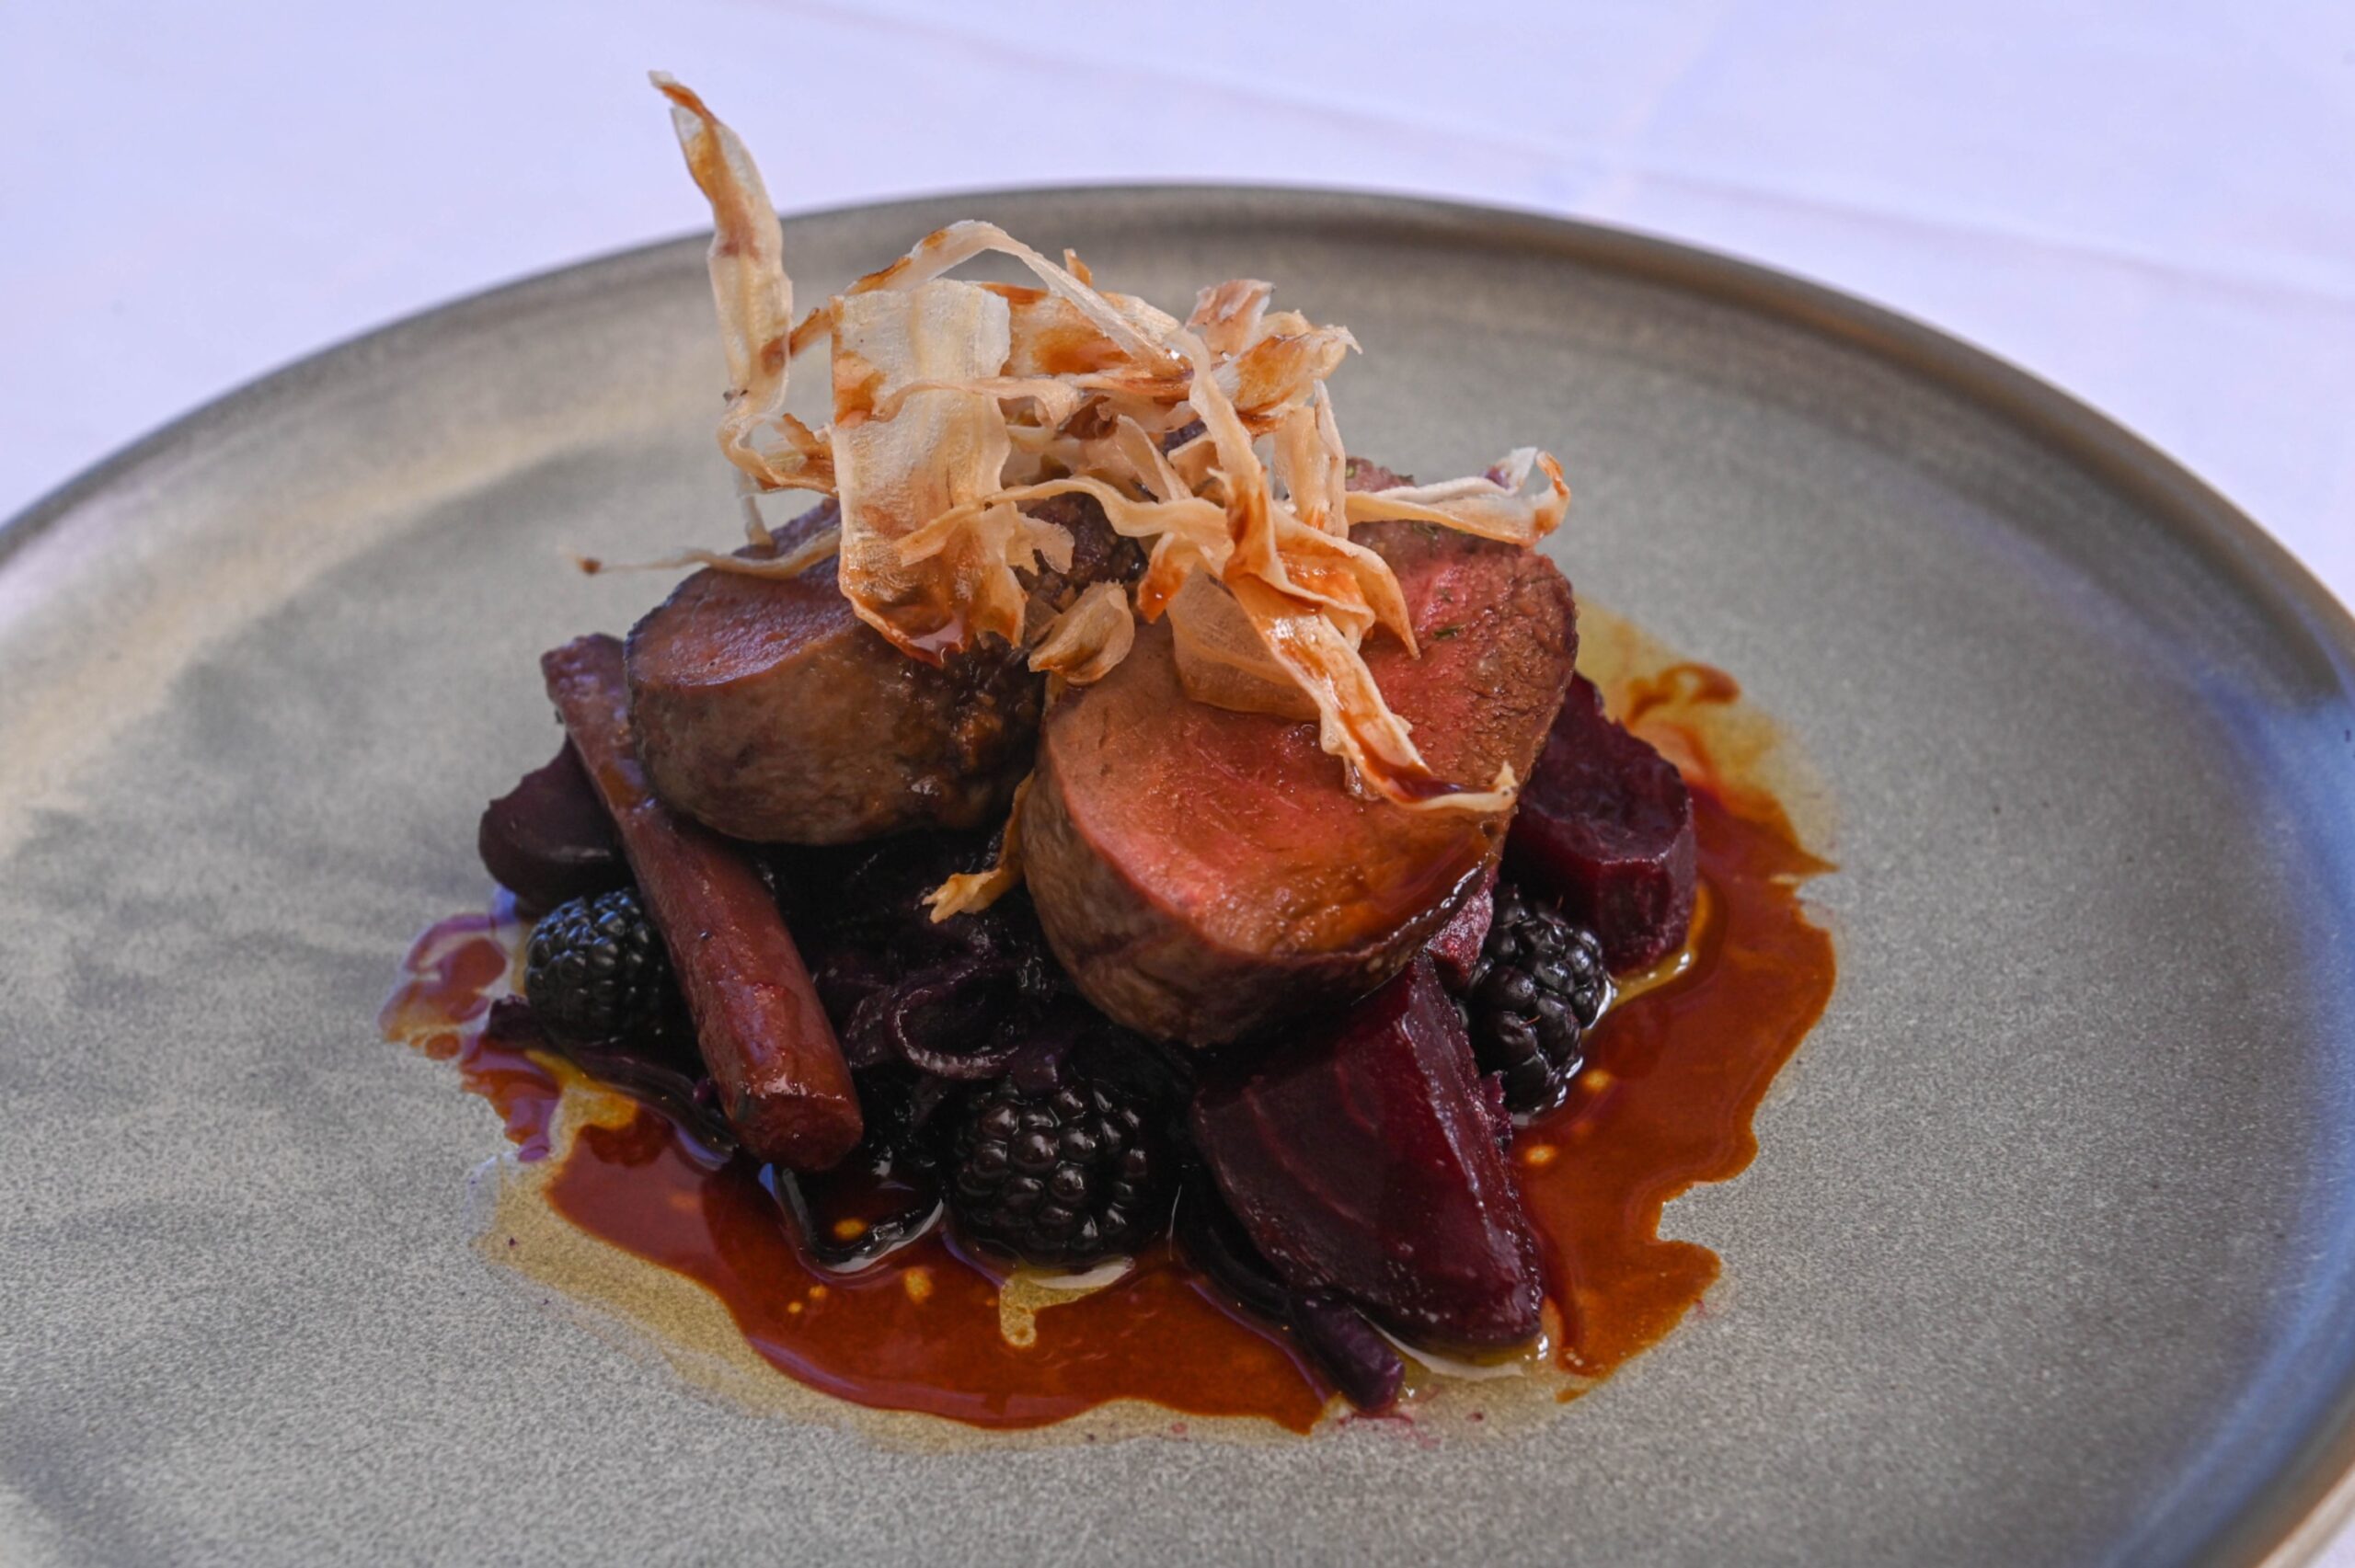 The saddle of venison at the Inverurie restaurant.